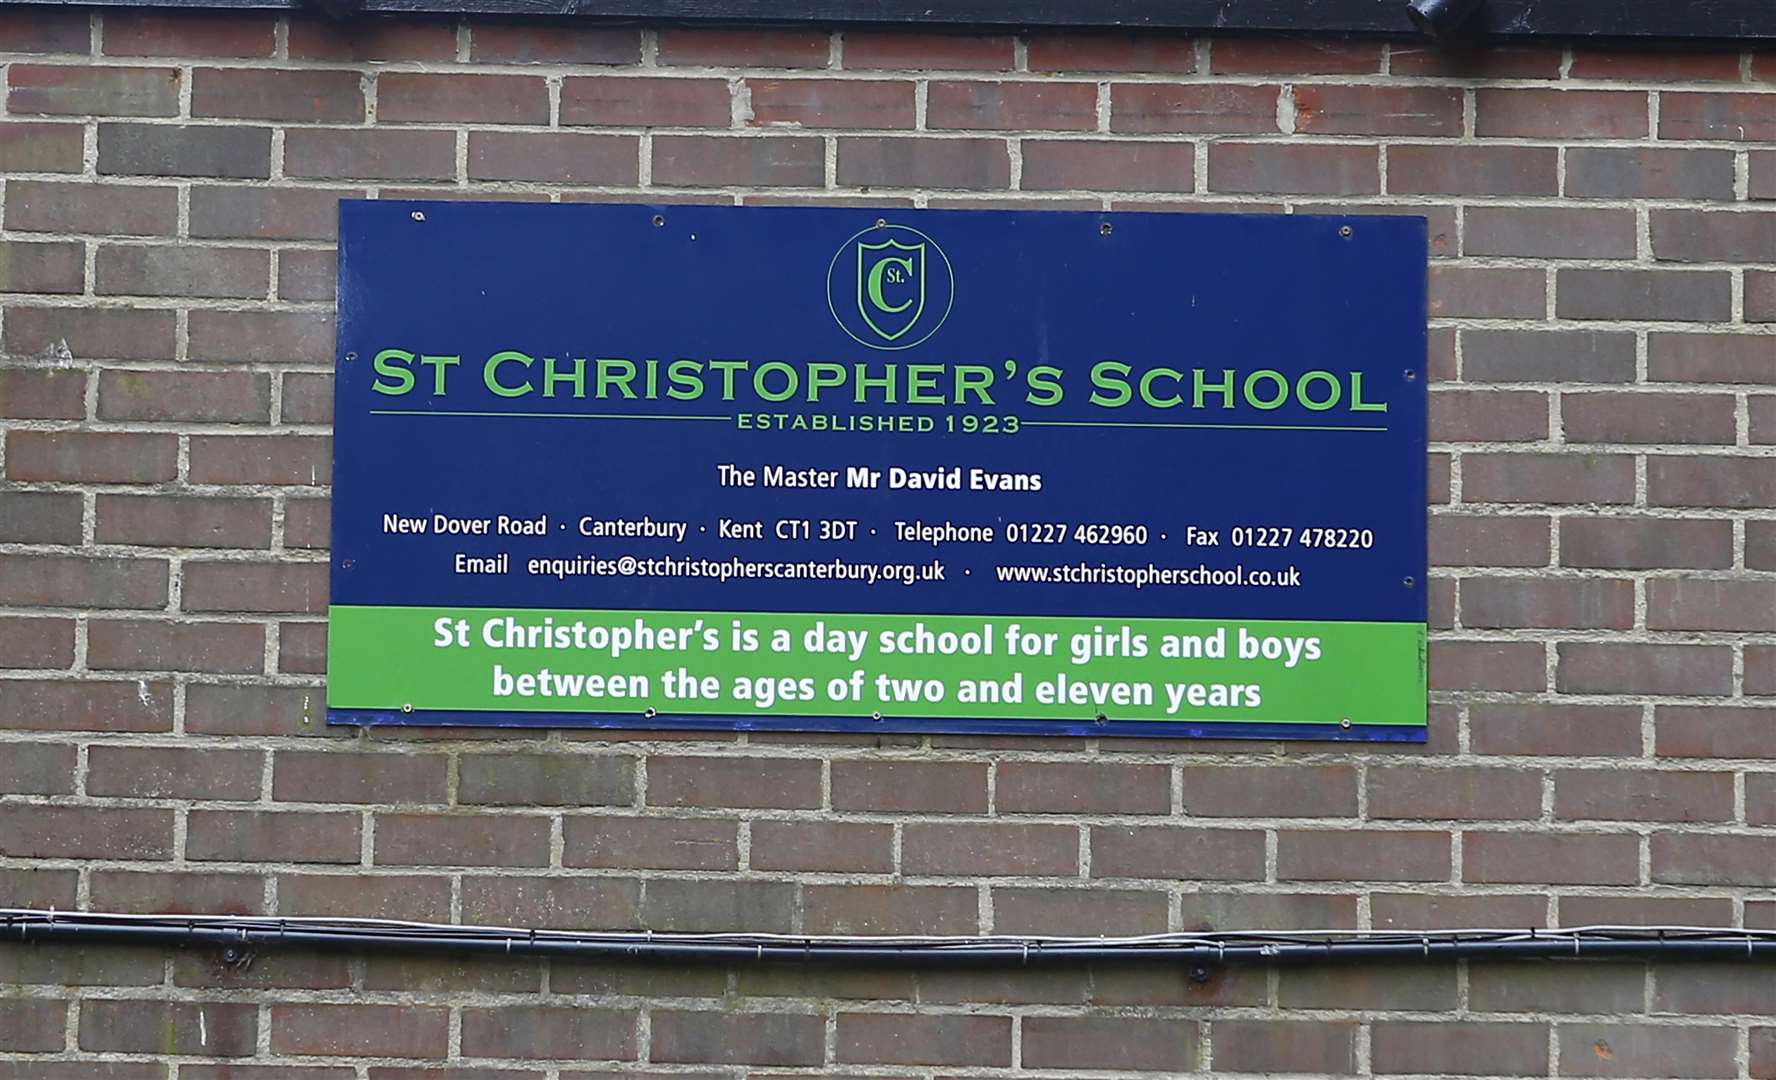 St Christopher's School in Canterbury